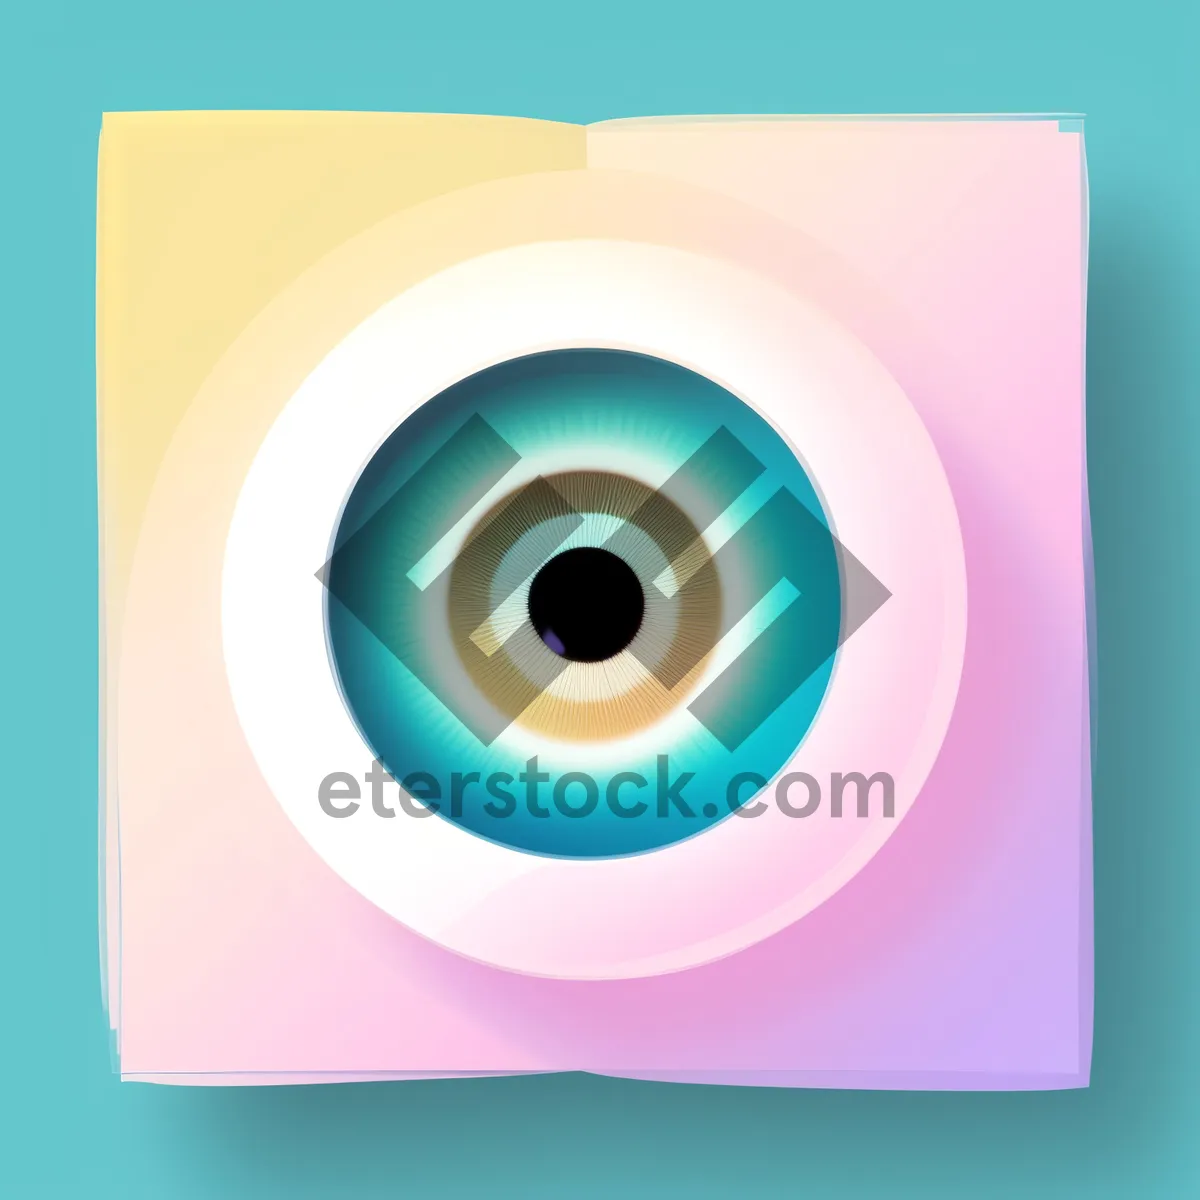 Picture of Modern glossy web button with shiny 3D circle icon.